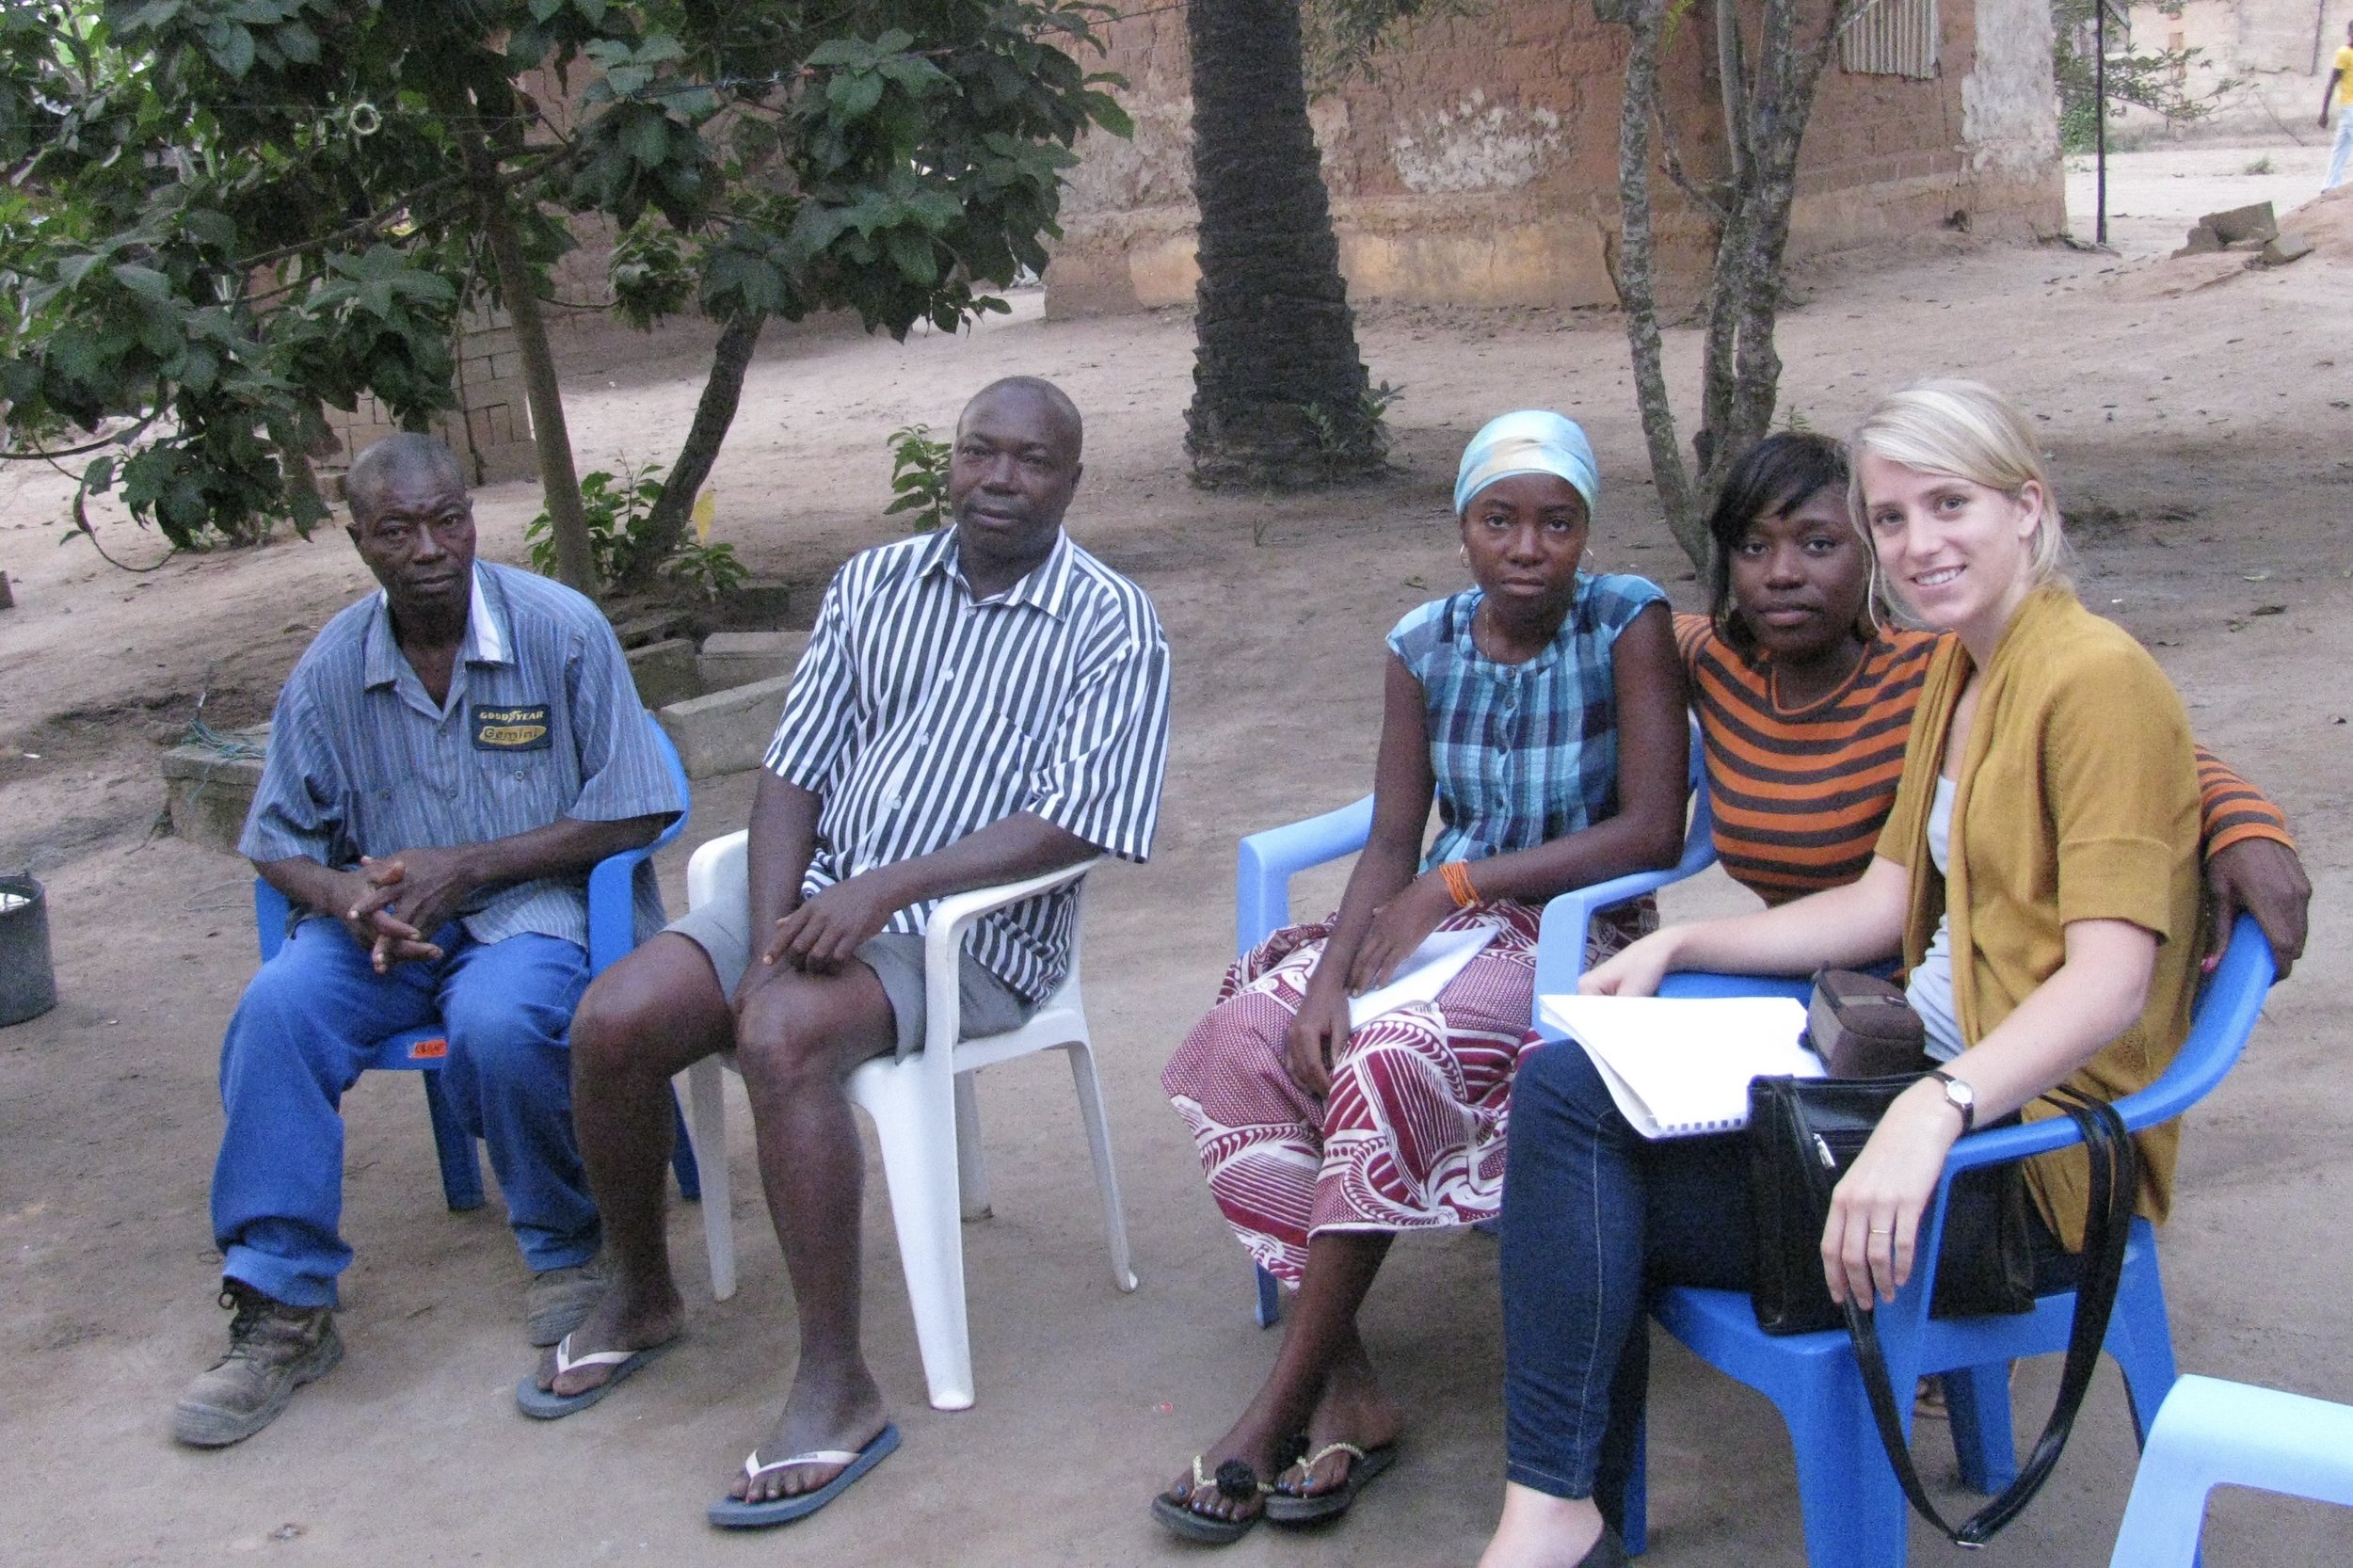 Teresa Vanessa Mateus (2 nd from right) working with an oil and gas focus group, Zaire, 2010